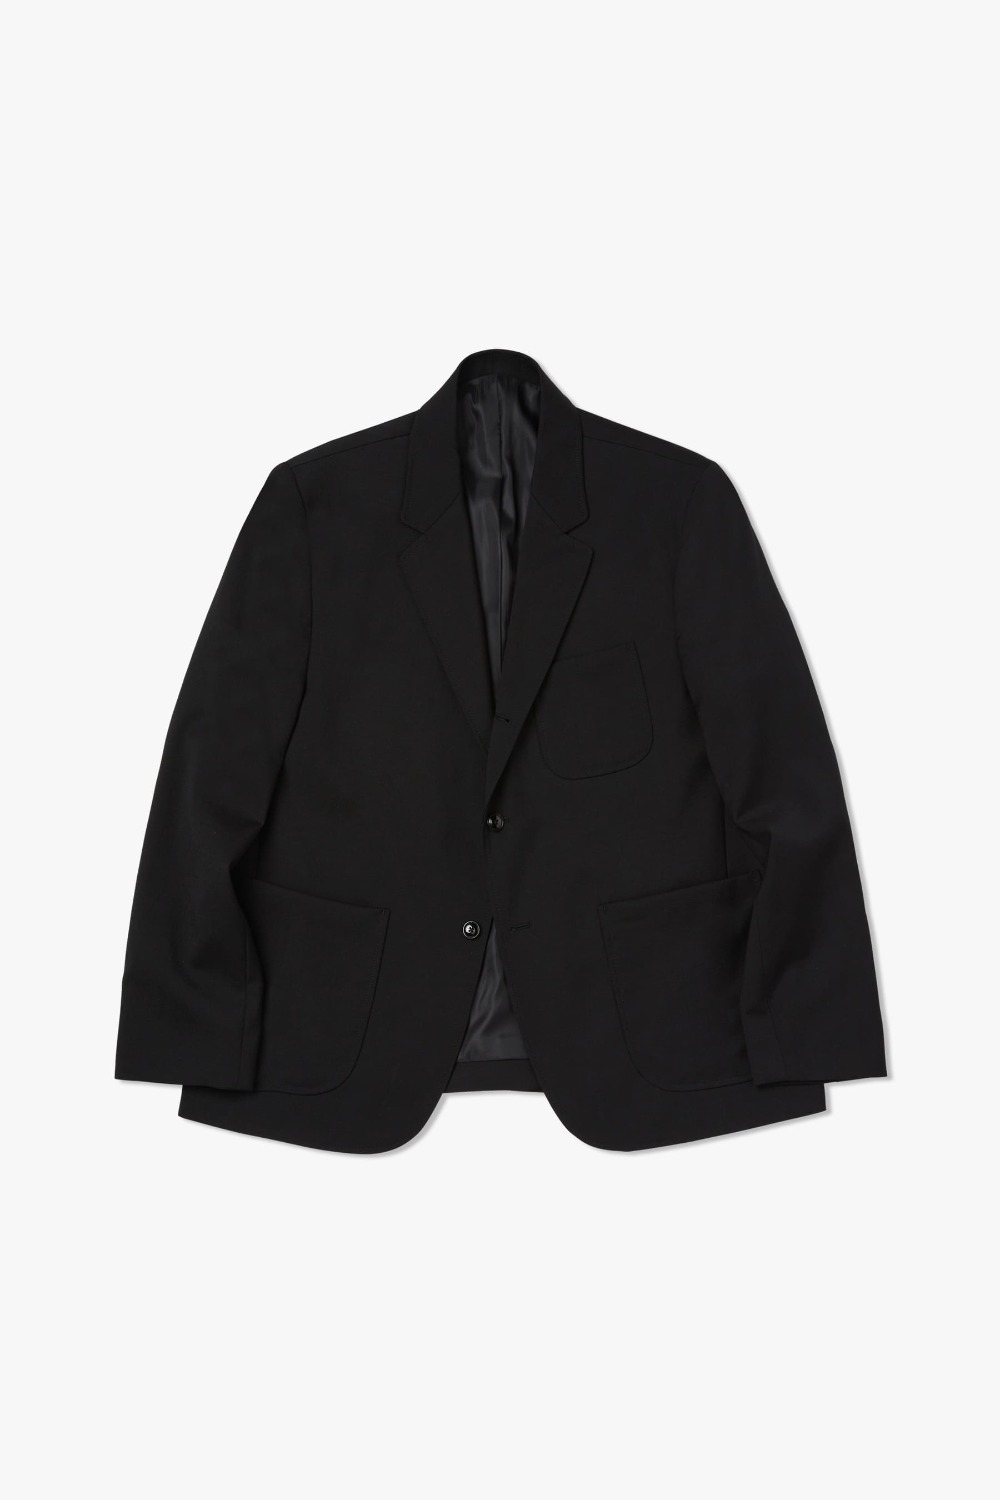 BLACK PHONIC SINGLE BREASTED BLAZER(STEREO TYPE)